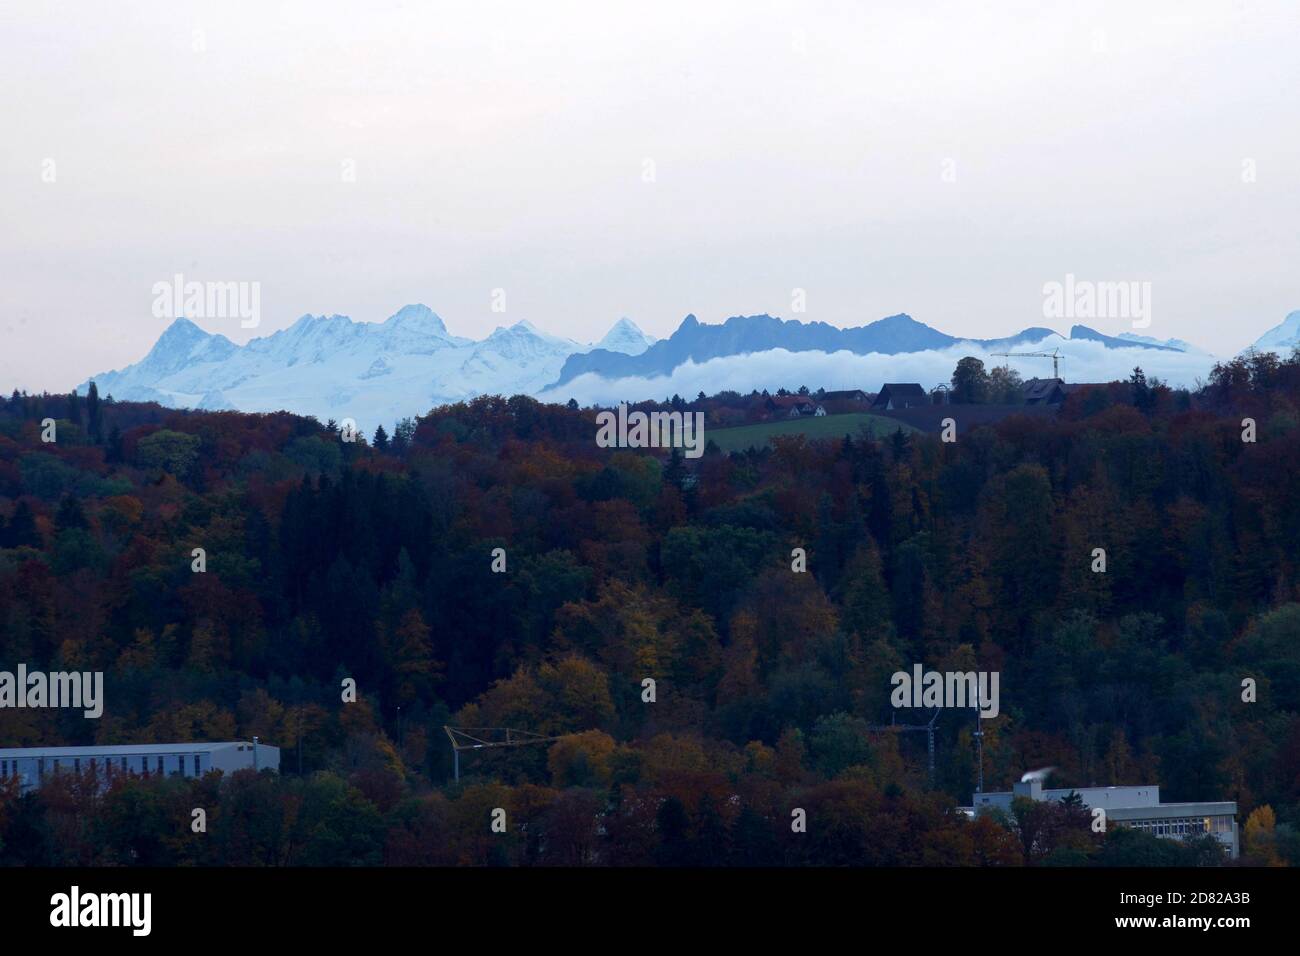 Autumn landscape  in canton Zurich, Switzerland at sunset. There are colorful mixed forests in the foreground and the Alps in the background. Stock Photo